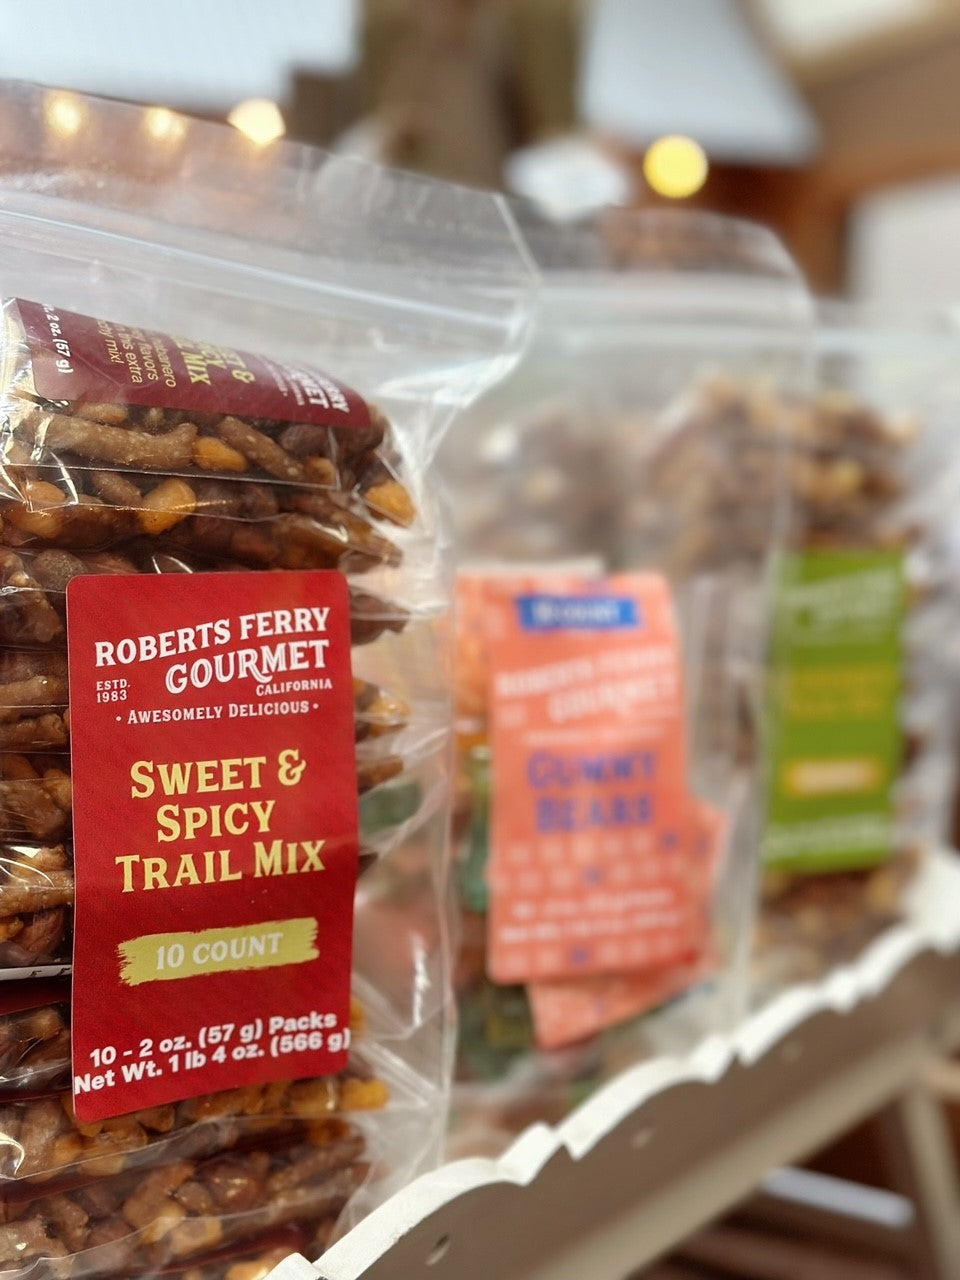 Sweet & Spicy Trail Mix